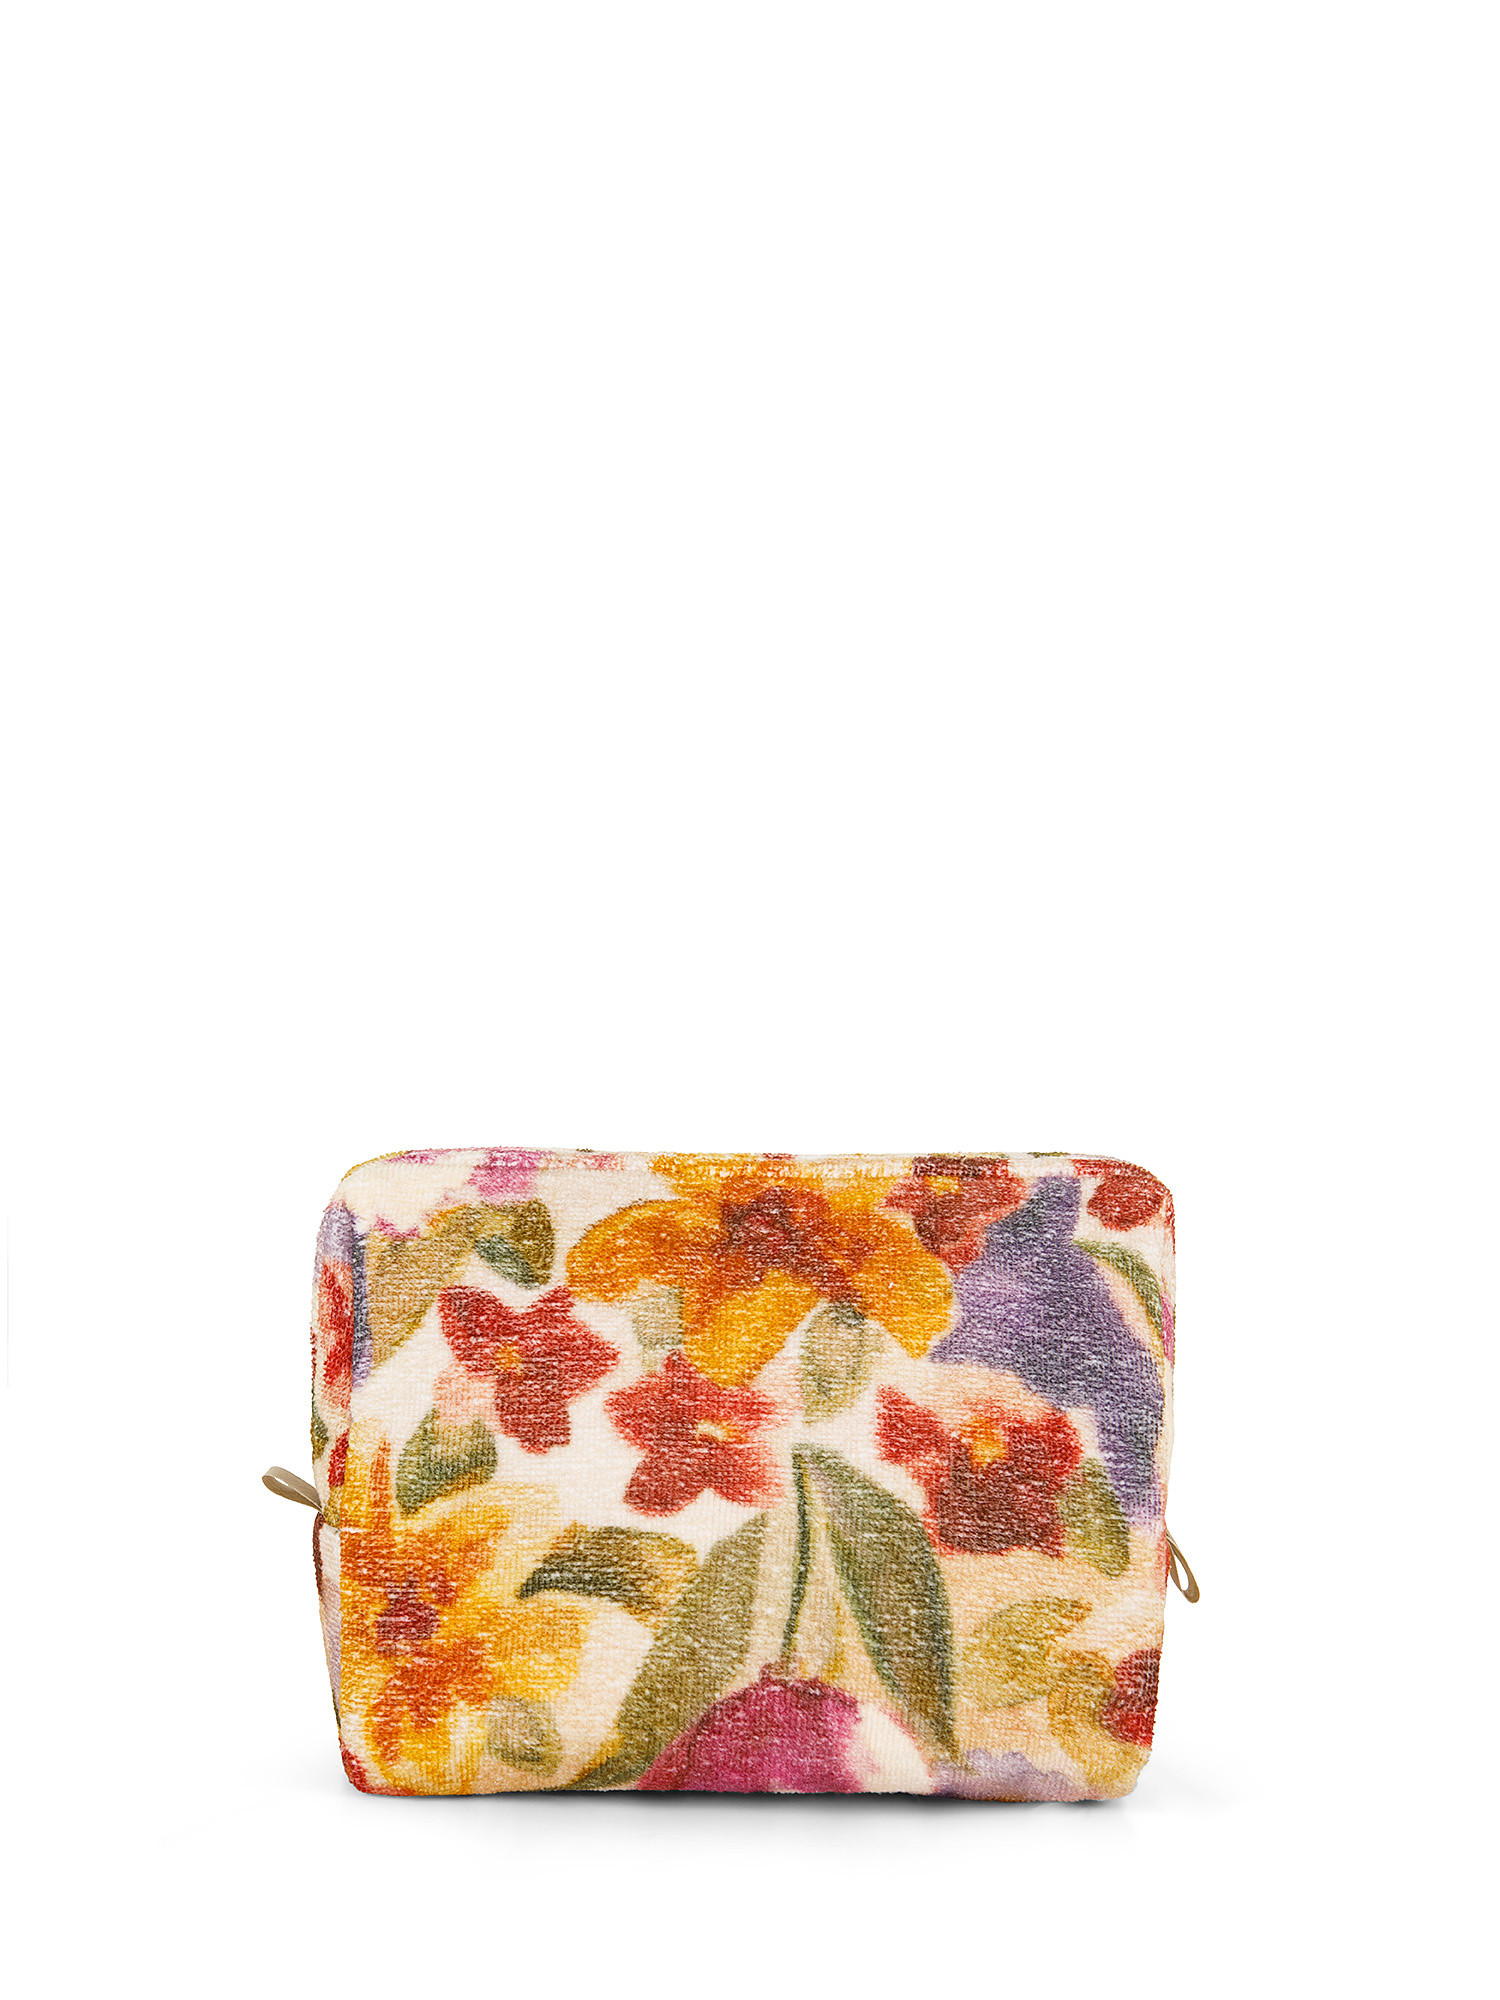 Beautycase cotton velor floral print, Multicolor, large image number 0